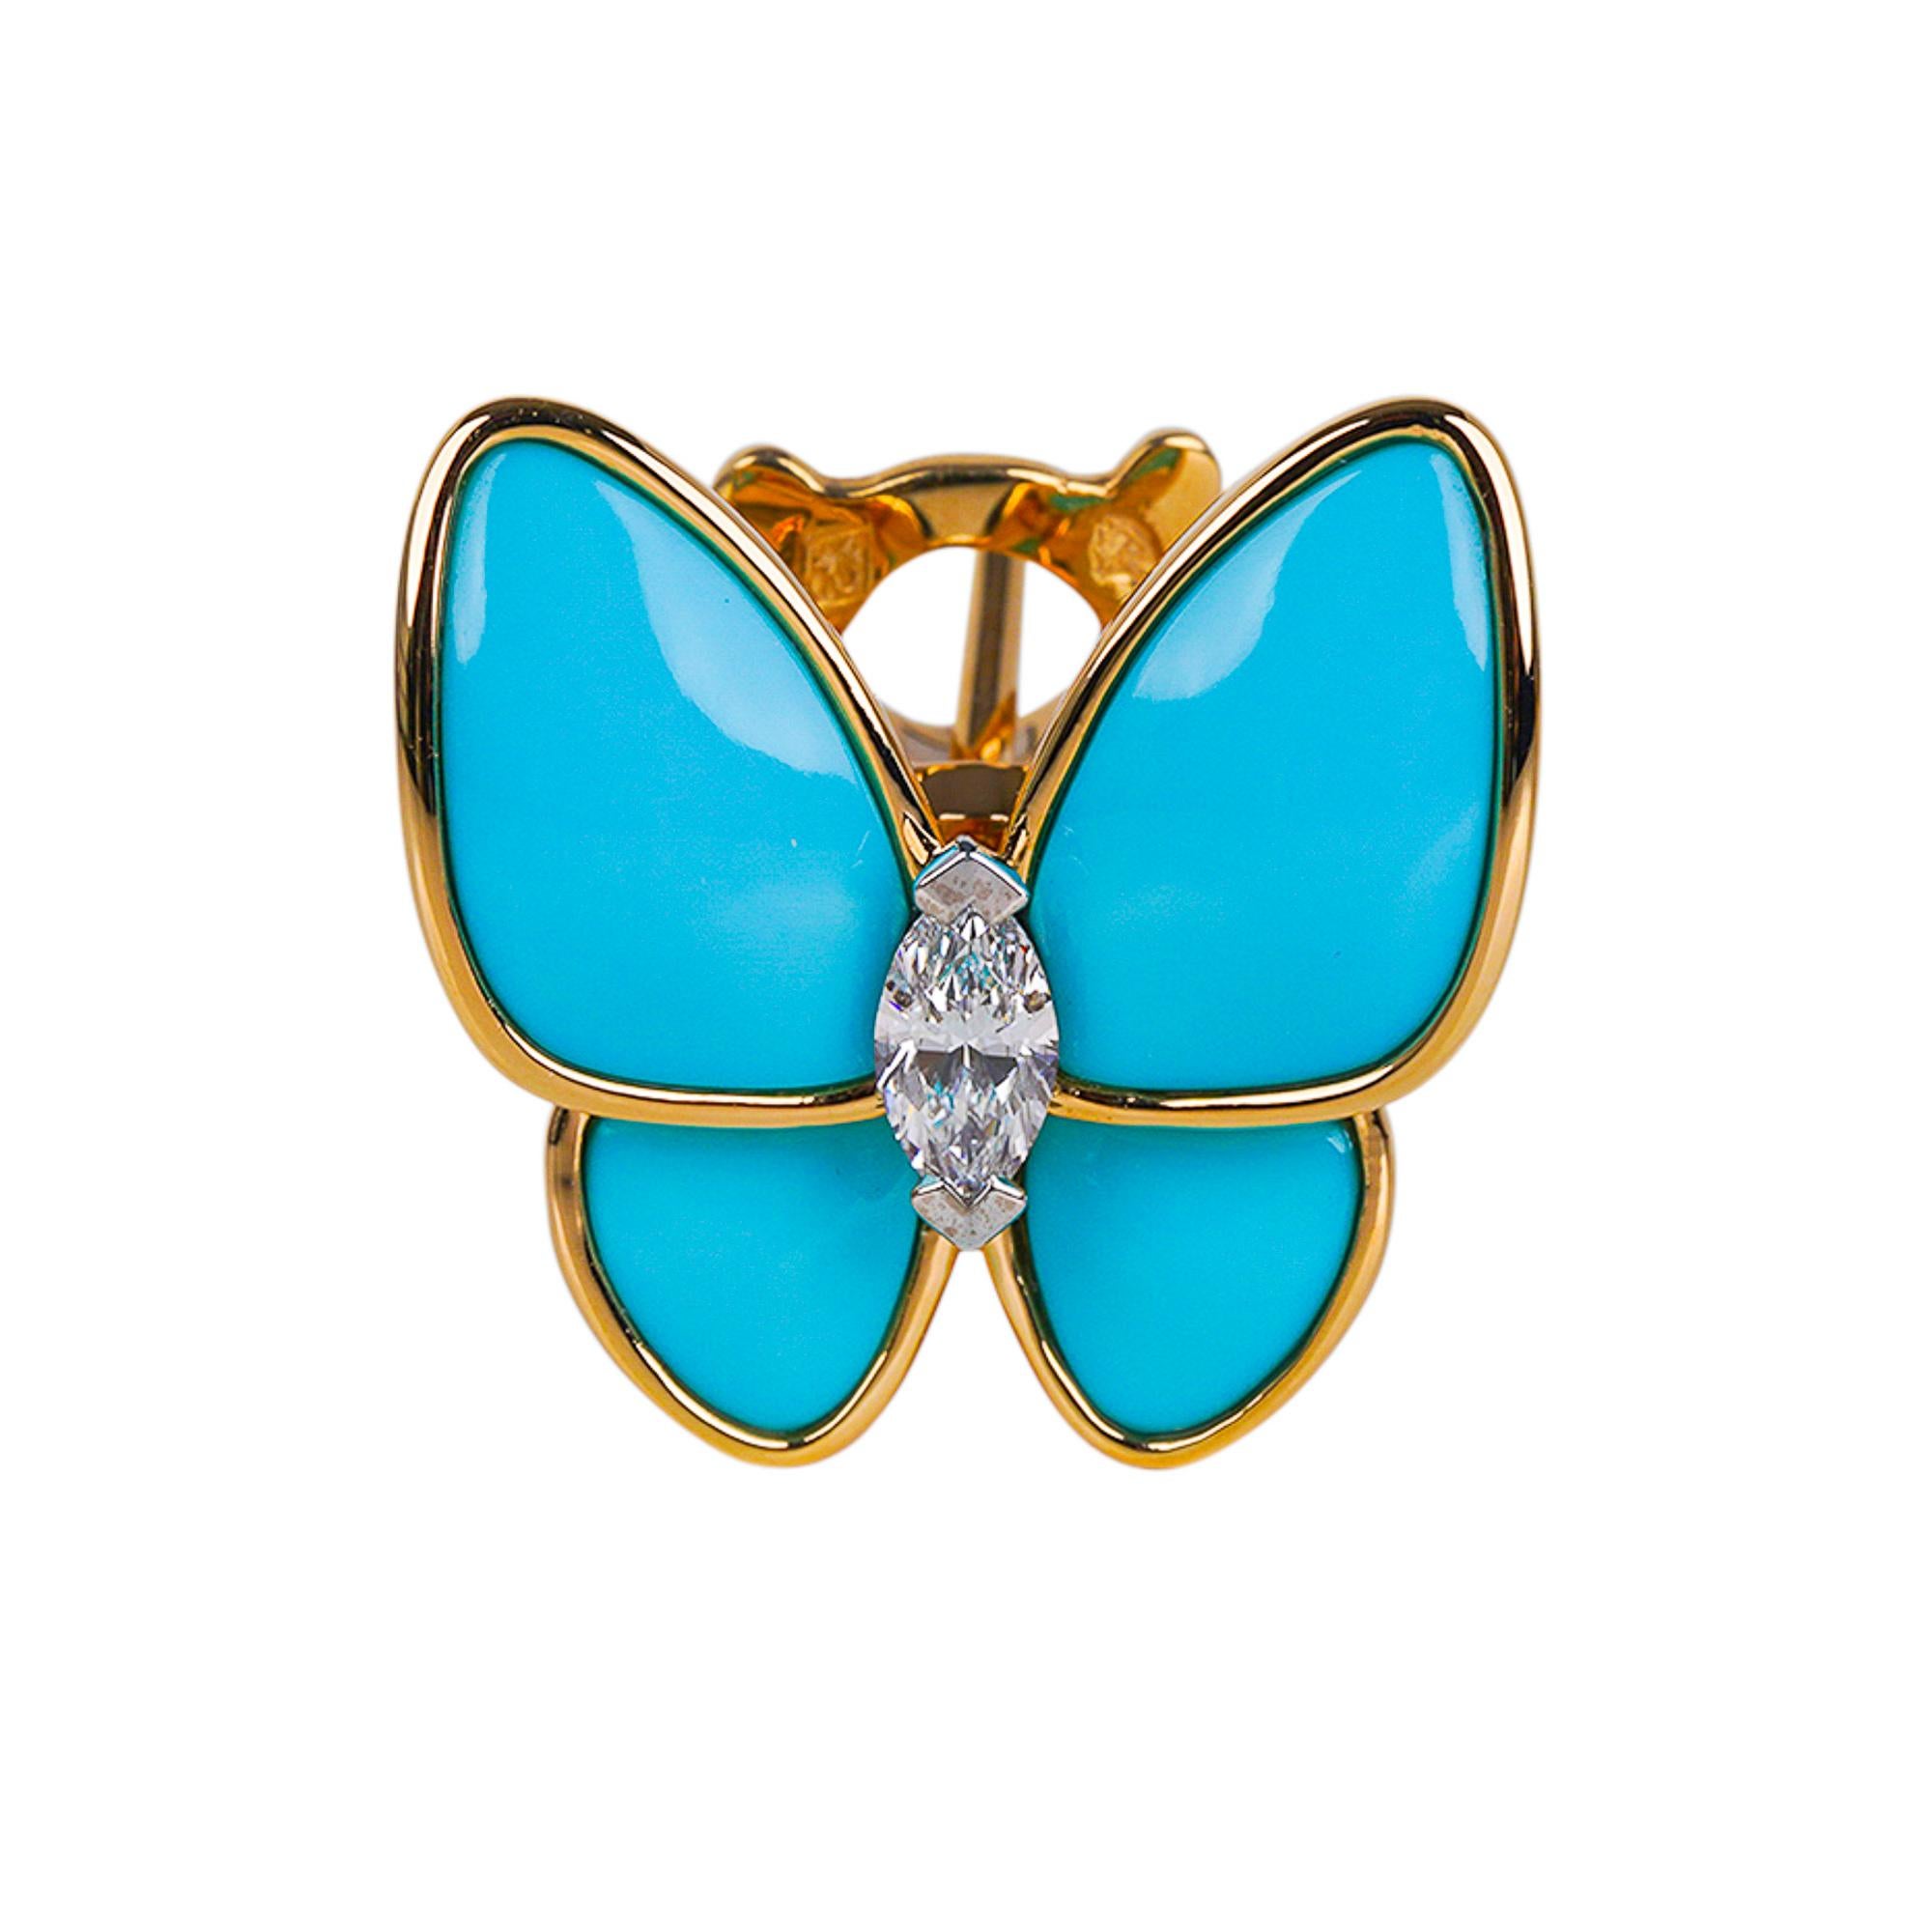 Mightychic offers a pair of handmade Van Cleef & Arpels Two Butterfly earrings.
Butterflies are beloved and represent new beginnings and hope.
Earrings are 18k Yellow Gold.
36 marquise-cut diamonds totalling 1 carat.
Diamond quality DEF, IF to